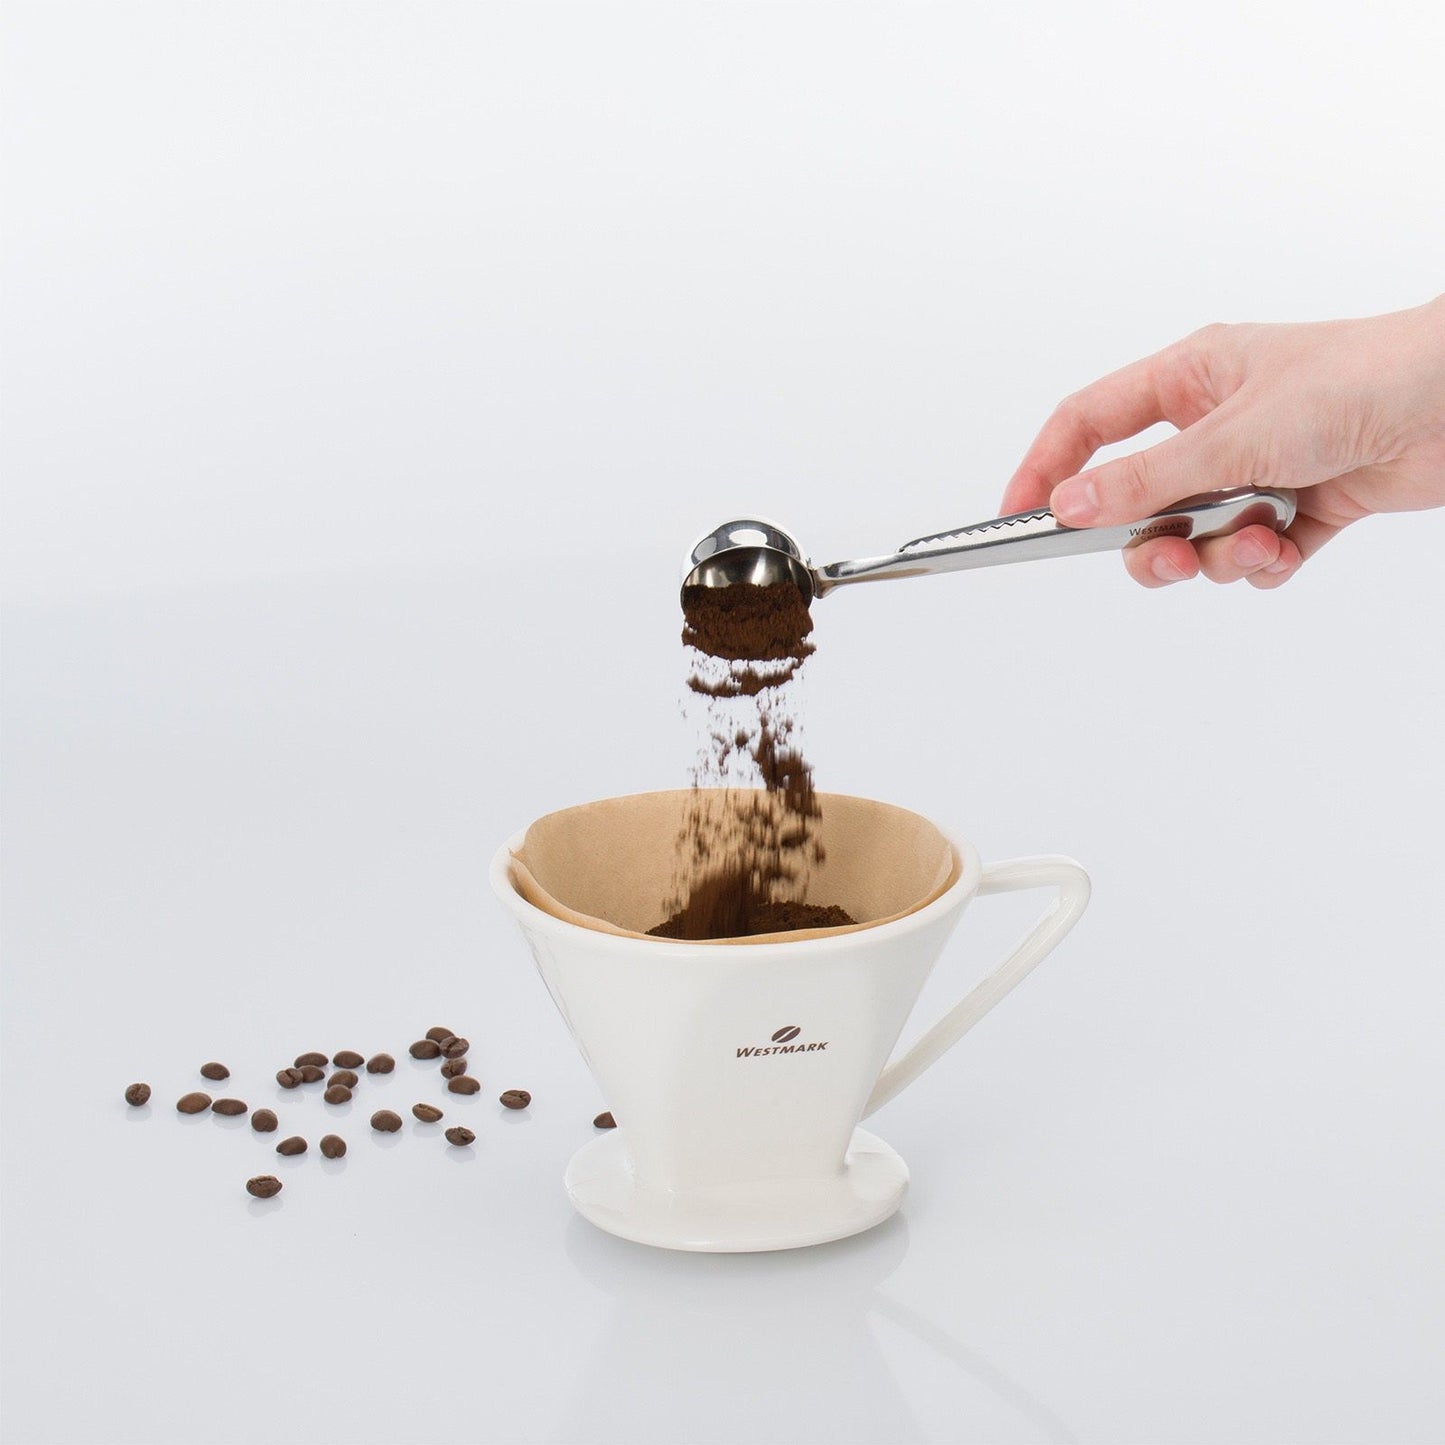 Westmark coffee scoop with sealing clip